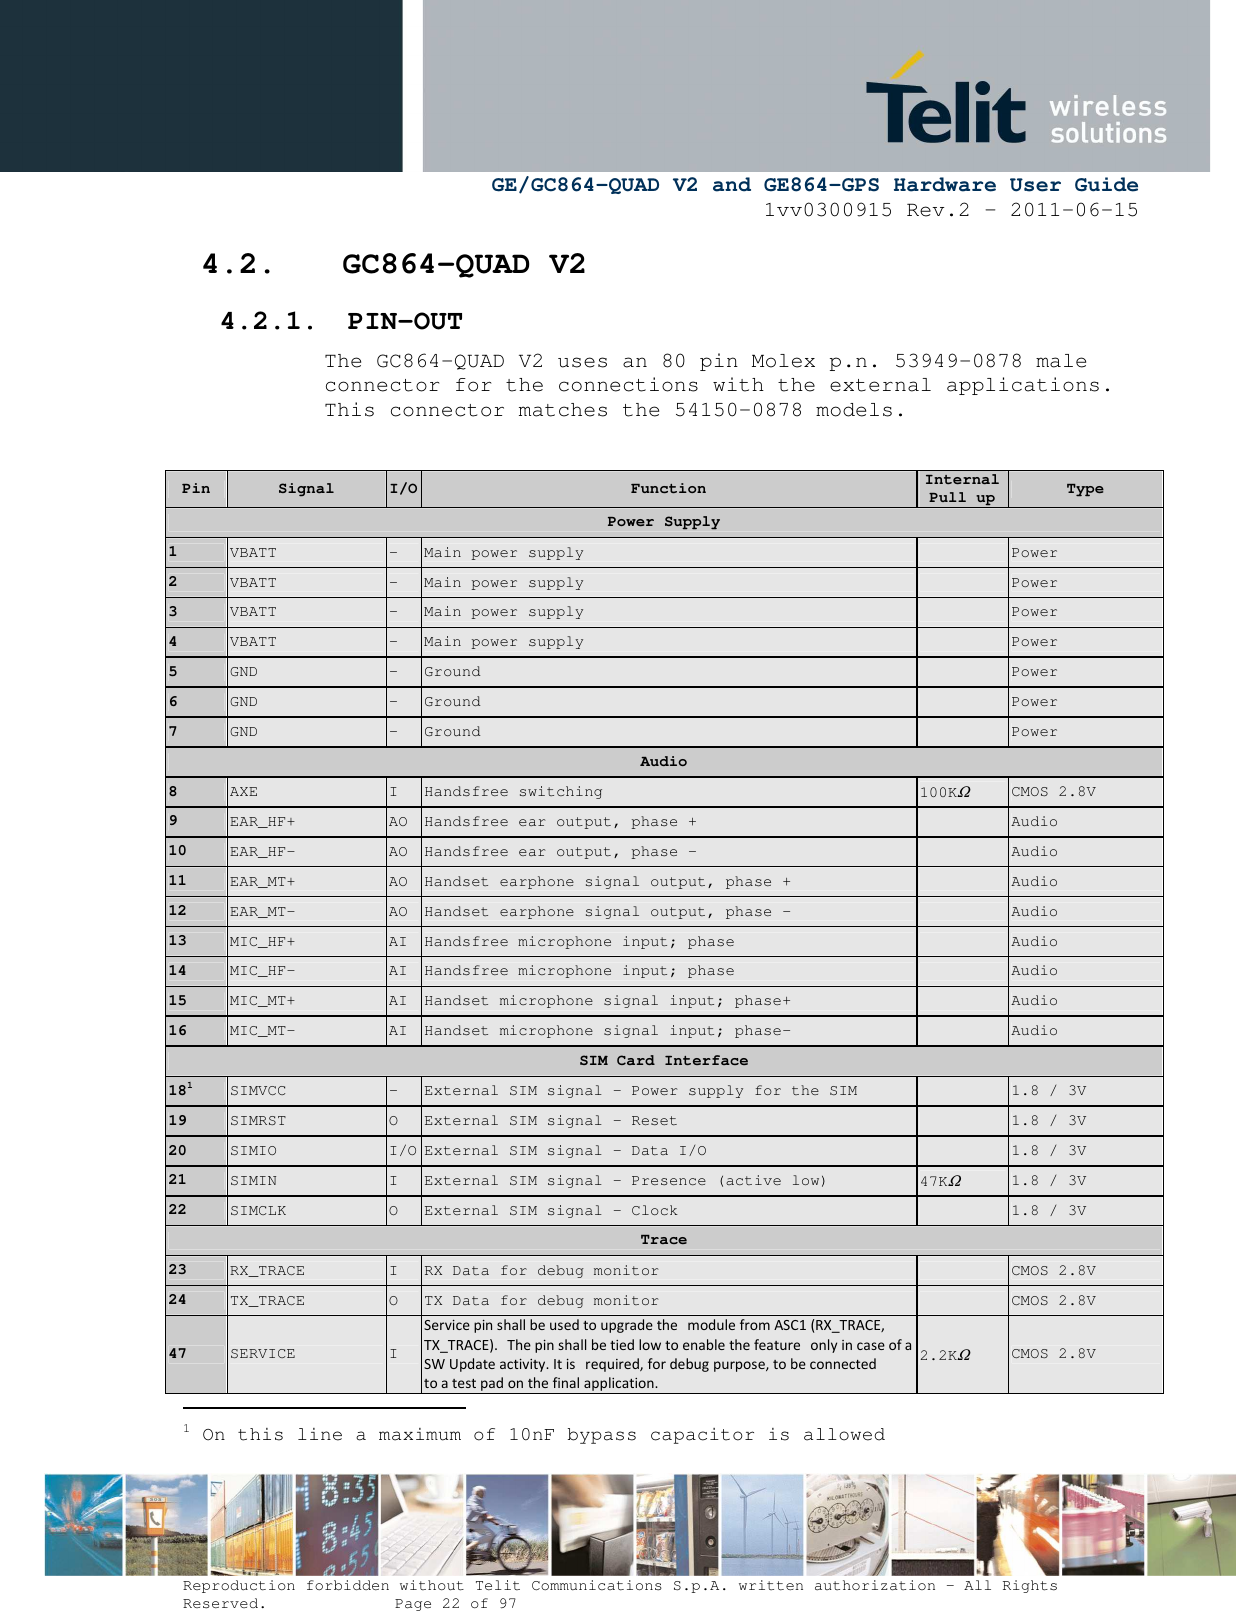      GE/GC864-QUAD V2 and GE864-GPS Hardware User Guide 1vv0300915 Rev.2 – 2011-06-15  Reproduction forbidden without Telit Communications S.p.A. written authorization - All Rights Reserved.    Page 22 of 97  4.2. GC864-QUAD V2 4.2.1. PIN-OUT The GC864-QUAD V2 uses an 80 pin Molex p.n. 53949-0878 male connector for the connections with the external applications. This connector matches the 54150-0878 models.  Pin  Signal  I/O Function Internal Pull up  Type Power Supply 1  VBATT  -  Main power supply    Power 2  VBATT  -  Main power supply    Power 3  VBATT  -  Main power supply    Power 4  VBATT  -  Main power supply    Power 5  GND  -  Ground    Power 6  GND  -  Ground    Power 7  GND  -  Ground    Power Audio 8  AXE  I  Handsfree switching  100KΩ CMOS 2.8V 9  EAR_HF+  AO  Handsfree ear output, phase +    Audio 10  EAR_HF-  AO  Handsfree ear output, phase -    Audio 11  EAR_MT+  AO  Handset earphone signal output, phase +    Audio 12  EAR_MT-  AO  Handset earphone signal output, phase -    Audio 13  MIC_HF+  AI  Handsfree microphone input; phase    Audio 14  MIC_HF-  AI  Handsfree microphone input; phase    Audio 15  MIC_MT+  AI  Handset microphone signal input; phase+    Audio 16  MIC_MT-  AI  Handset microphone signal input; phase-    Audio SIM Card Interface 181 SIMVCC  -  External SIM signal – Power supply for the SIM    1.8 / 3V 19  SIMRST  O  External SIM signal – Reset    1.8 / 3V 20  SIMIO  I/O External SIM signal - Data I/O    1.8 / 3V 21  SIMIN  I  External SIM signal - Presence (active low)  47KΩ 1.8 / 3V 22  SIMCLK  O  External SIM signal – Clock    1.8 / 3V Trace 23  RX_TRACE  I  RX Data for debug monitor    CMOS 2.8V 24  TX_TRACE  O  TX Data for debug monitor    CMOS 2.8V 47  SERVICE  I Service pin shall be used to upgrade the module from ASC1 (RX_TRACE, TX_TRACE). The pin shall be tied low to enable the feature only in case of a SW Update activity. It is required, for debug purpose, to be connected to a test pad on the final application. 2.2KΩ CMOS 2.8V                        1 On this line a maximum of 10nF bypass capacitor is allowed 